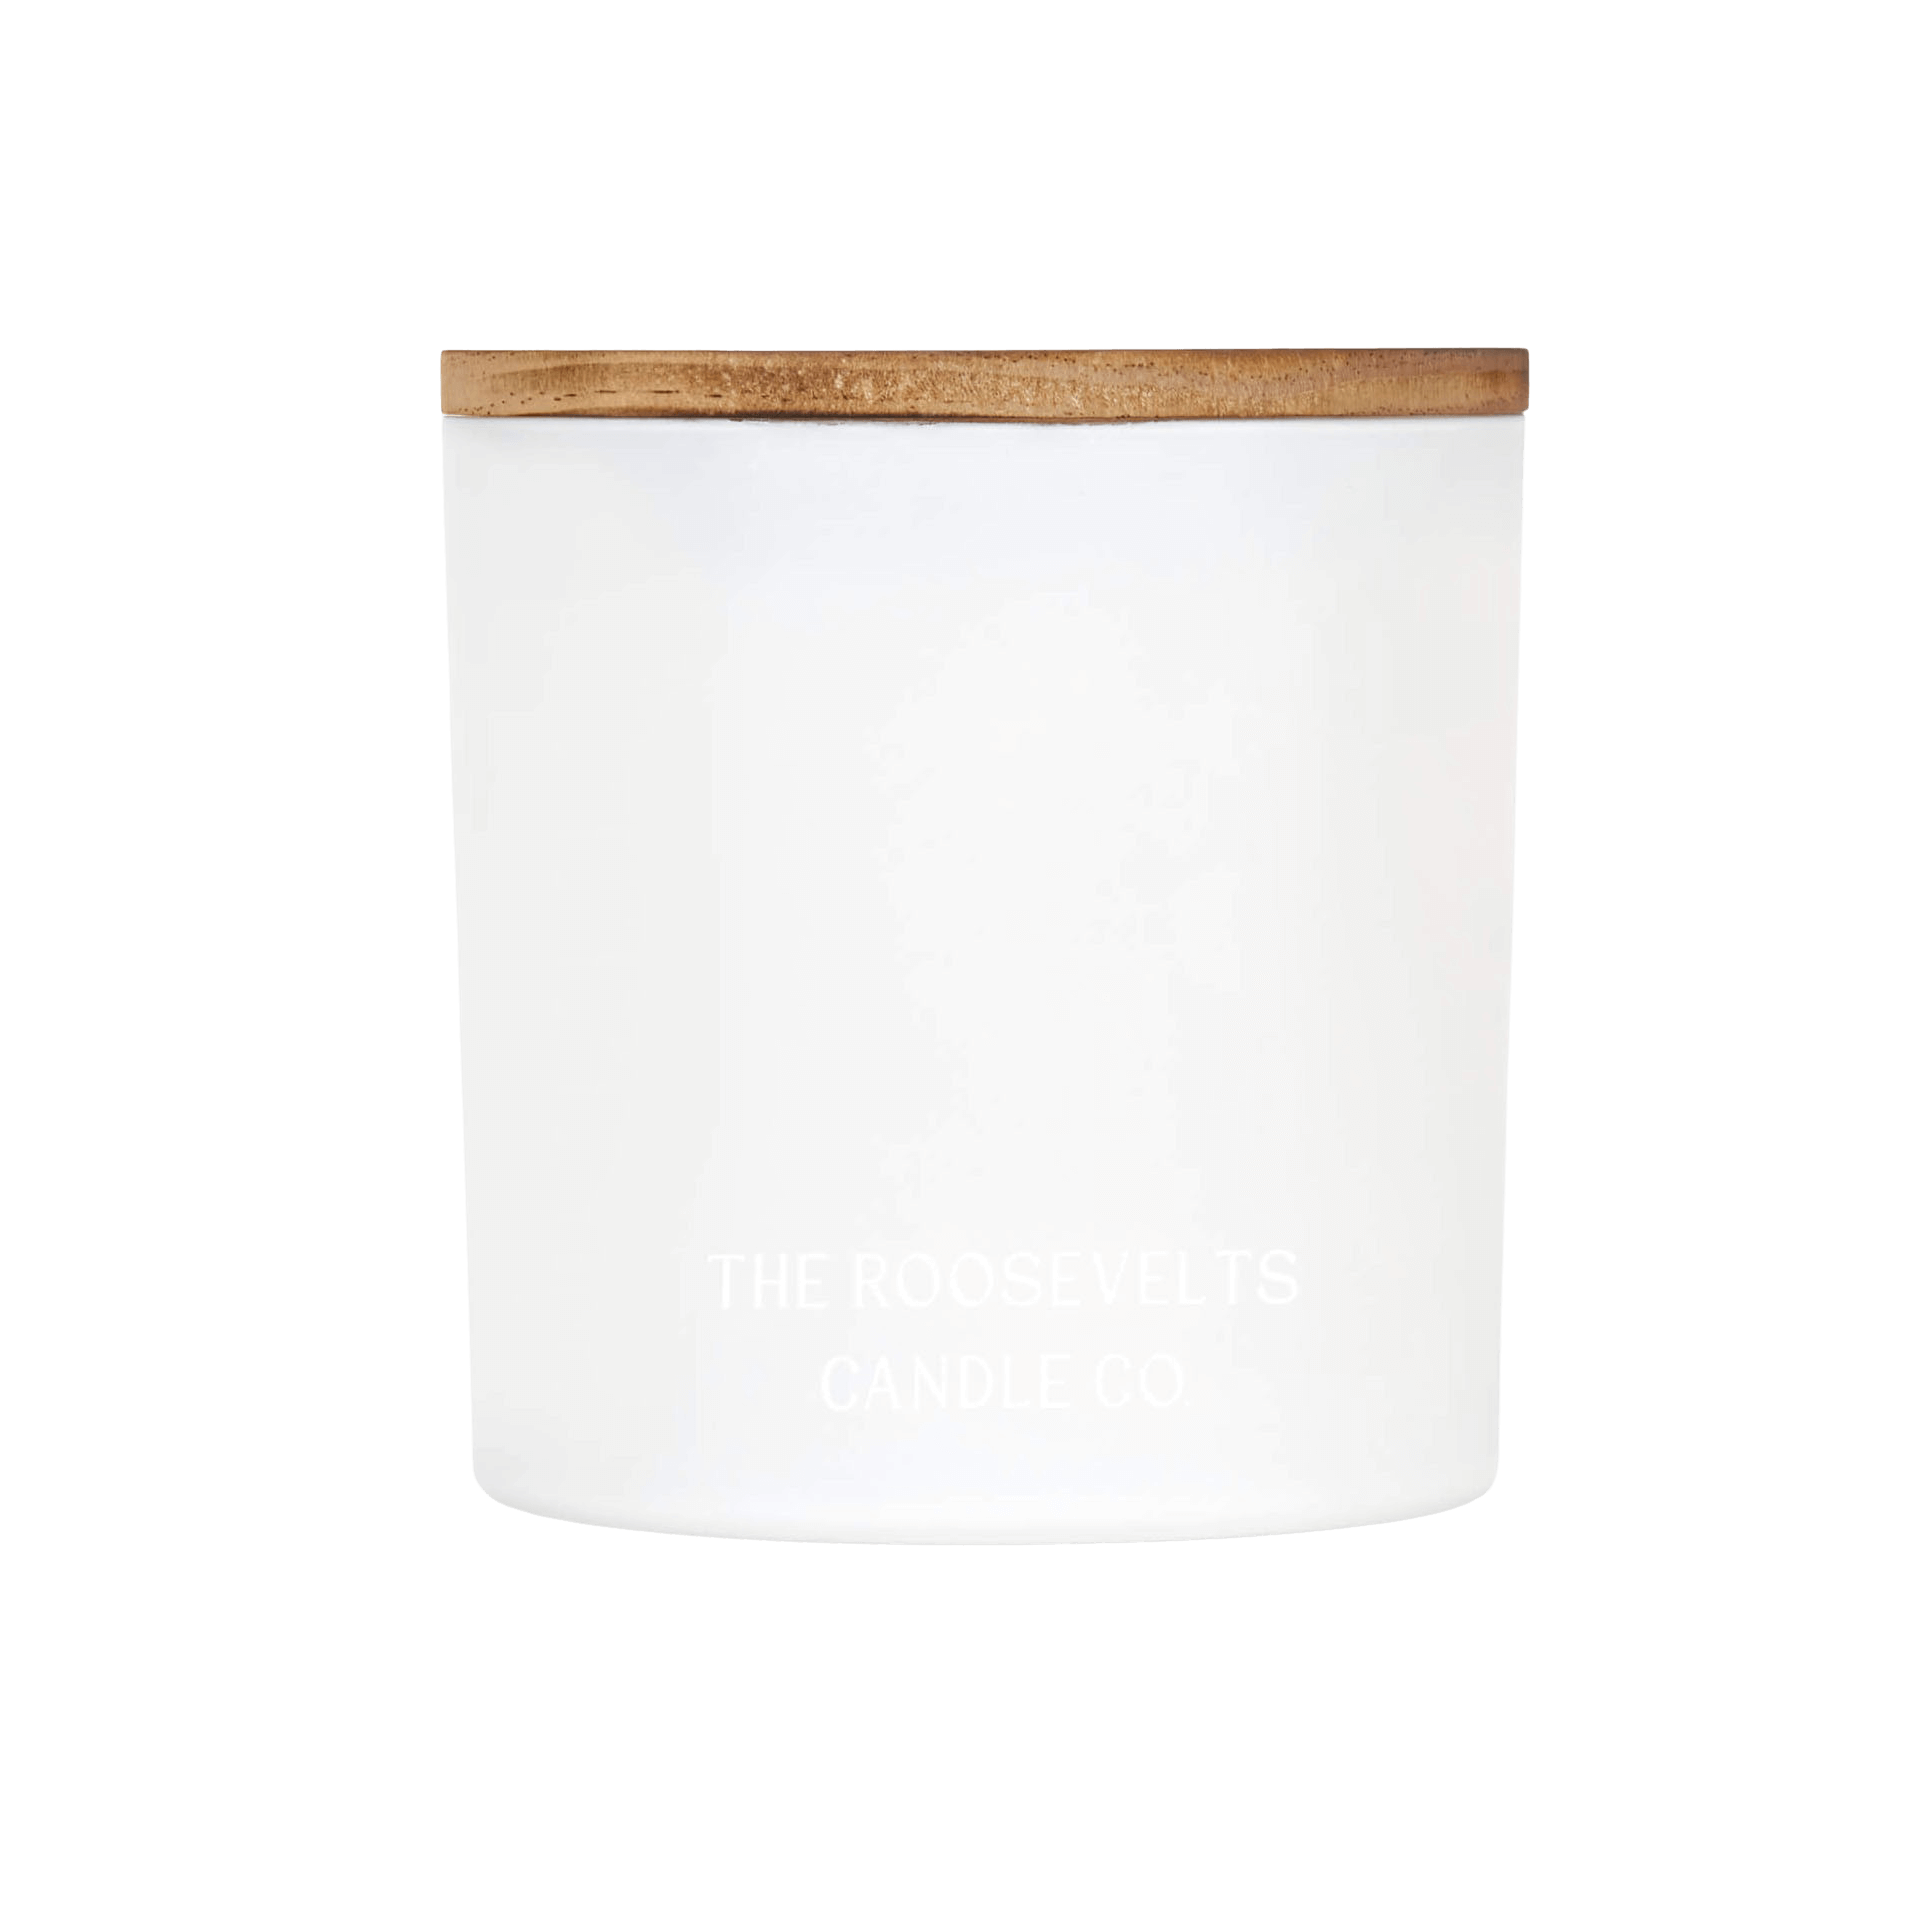 3-Wick Candle - The Roosevelts Candle Co.